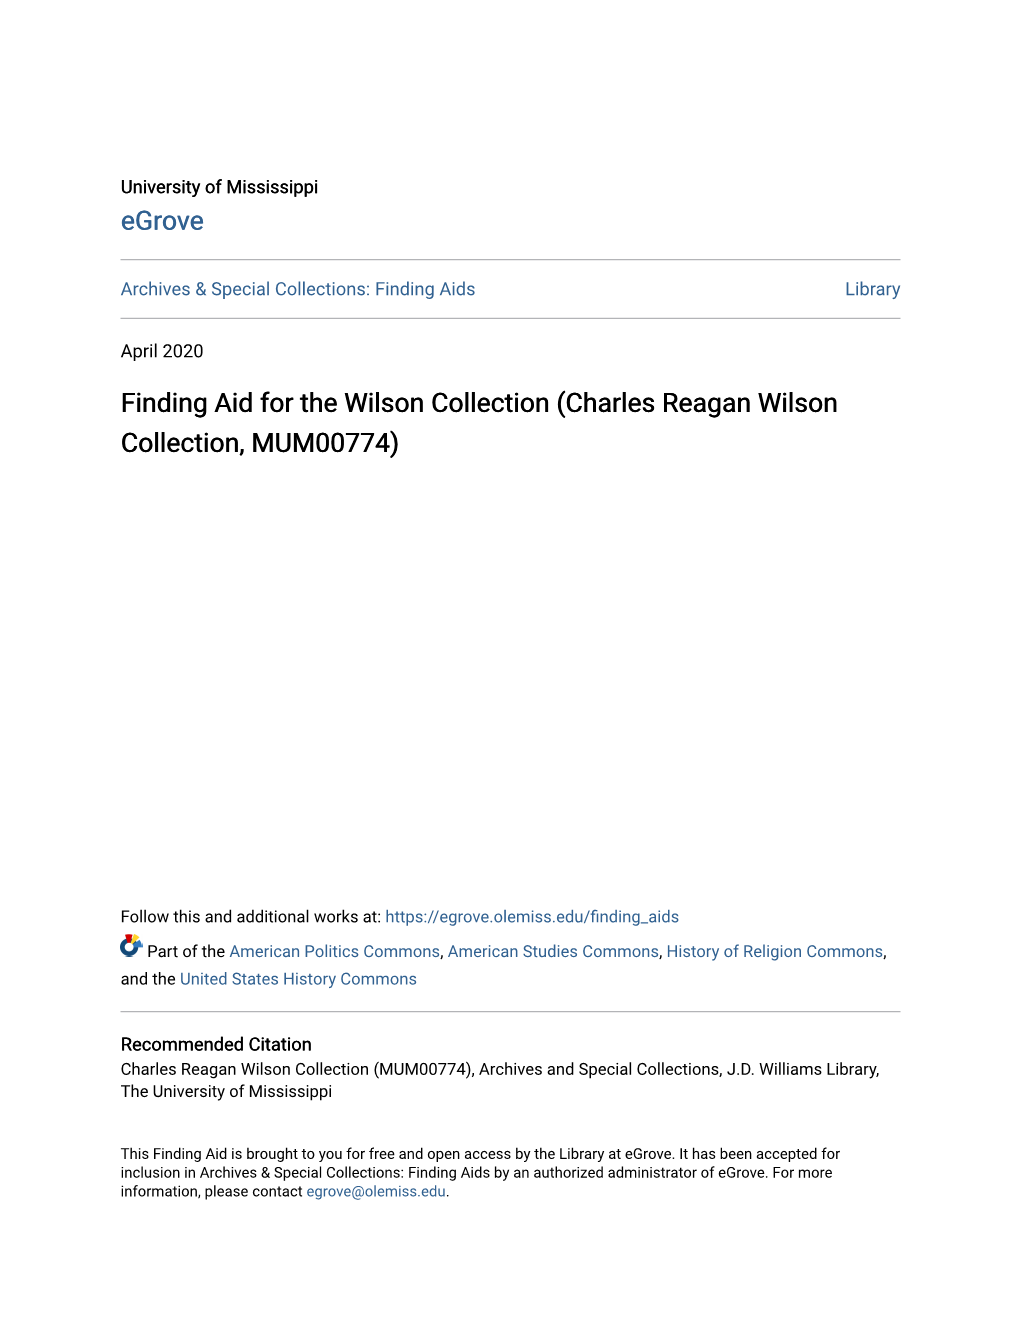 Finding Aid for the Wilson Collection (Charles Reagan Wilson Collection, MUM00774)